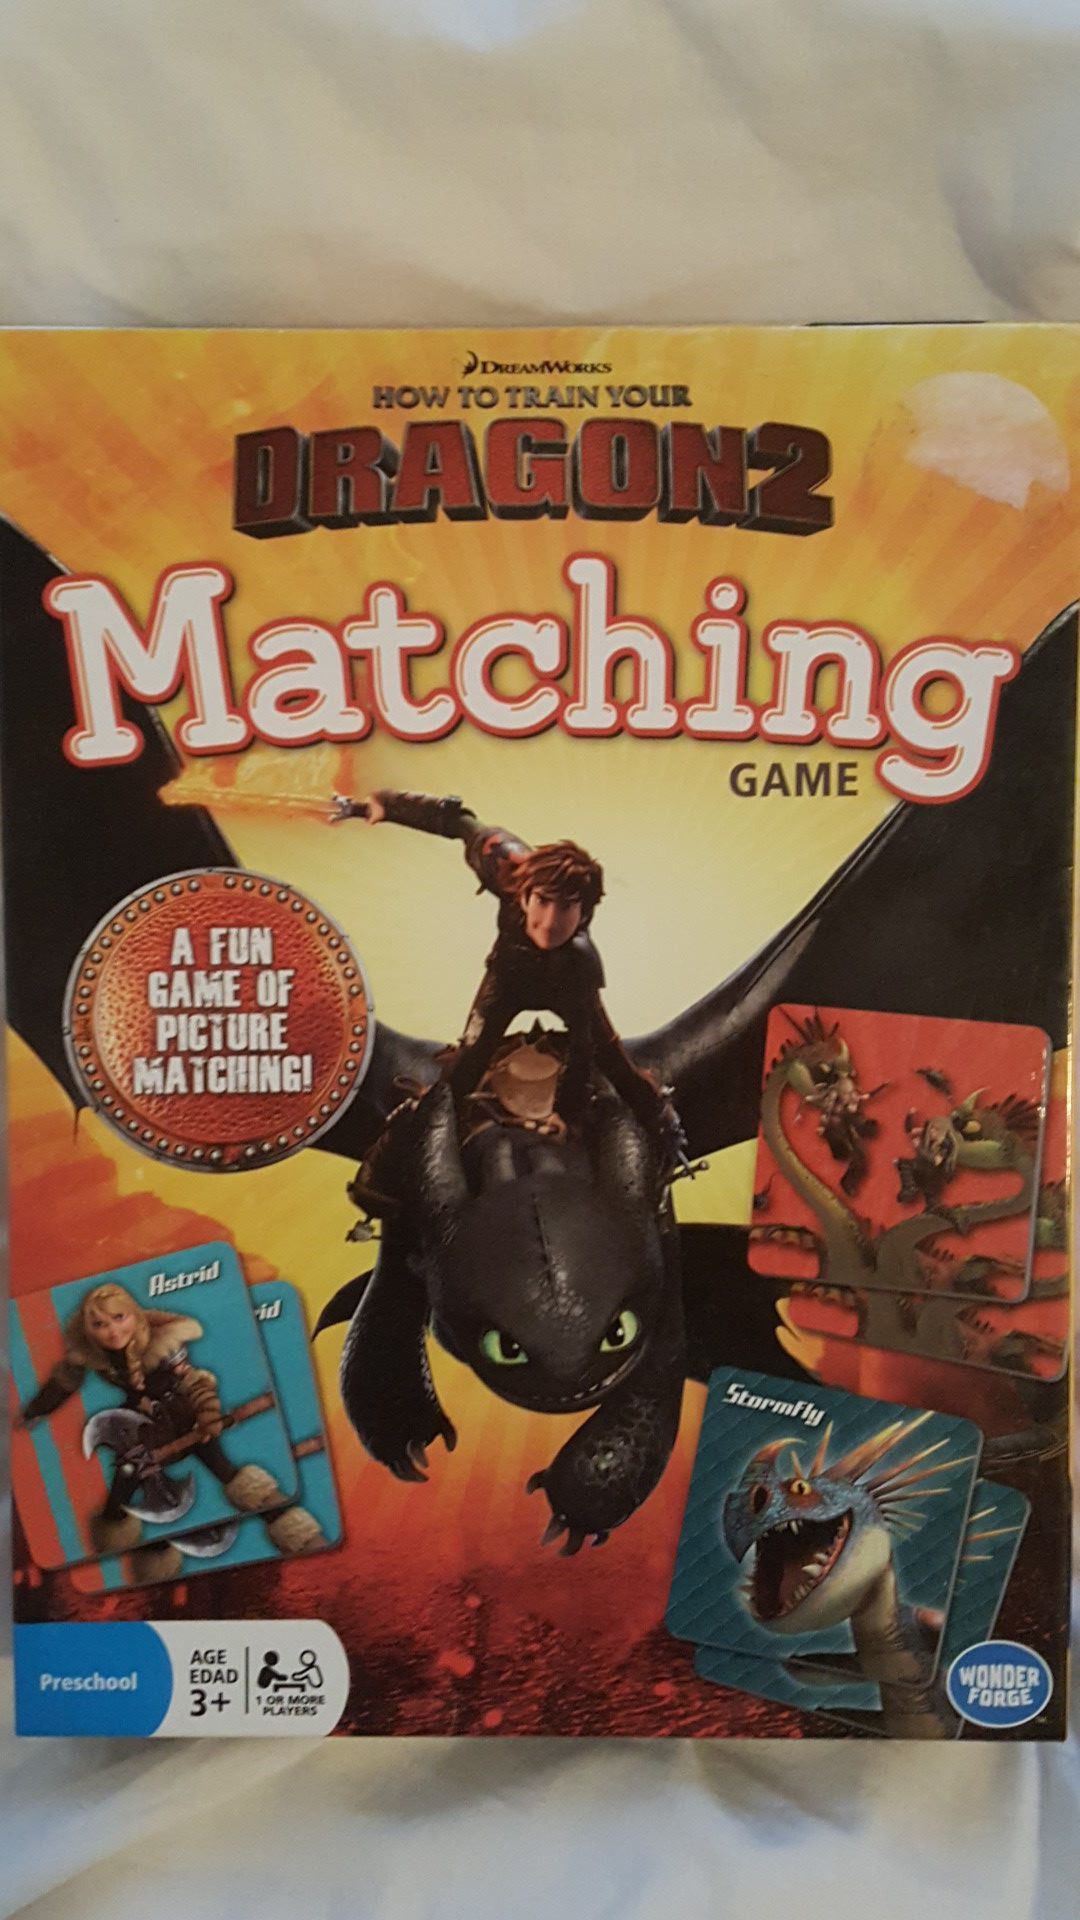 How to train your Dragon matching game